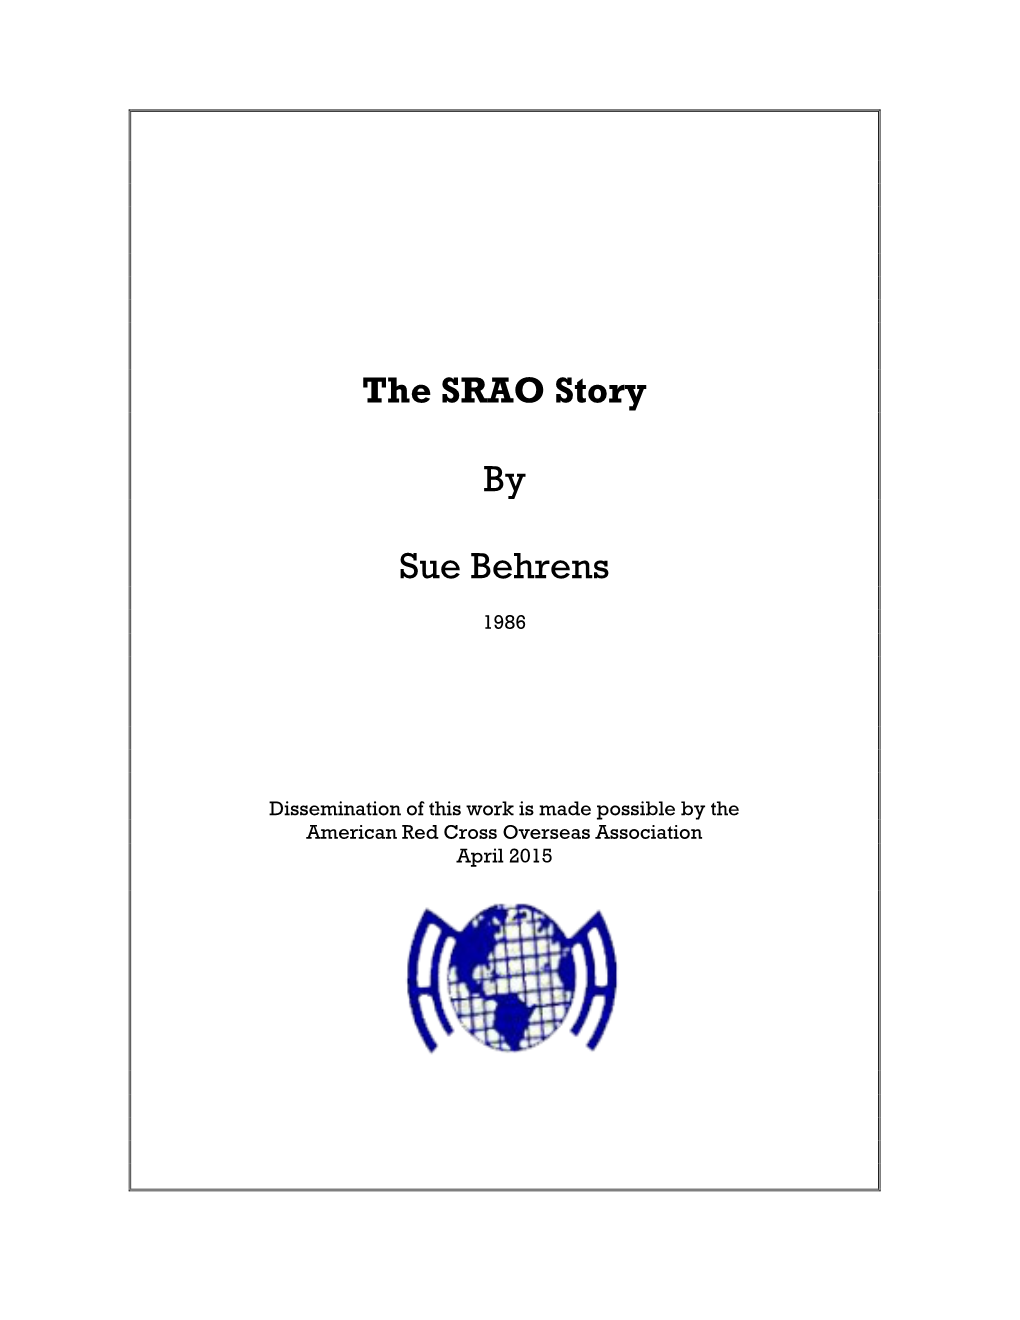 The SRAO Story by Sue Behrens